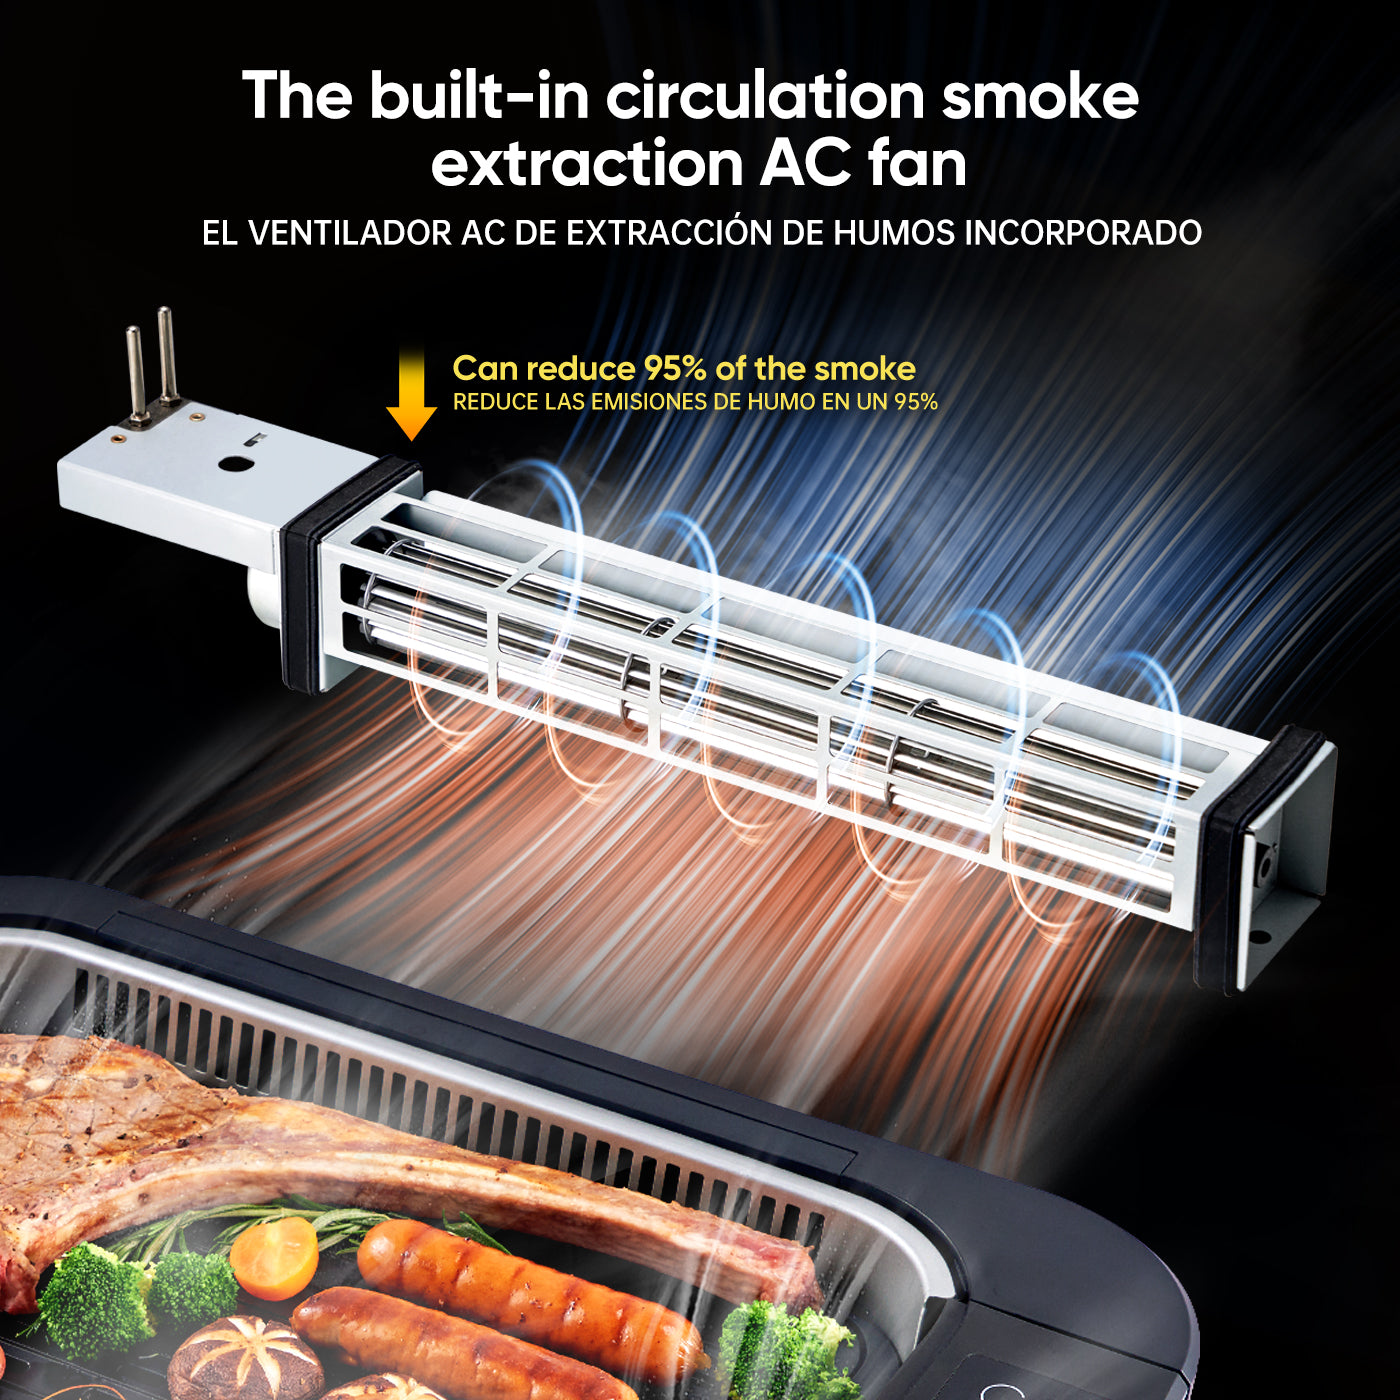 The invention of the indoor smokeless grill solves the problem of smoke and odor filling your home when grilling.